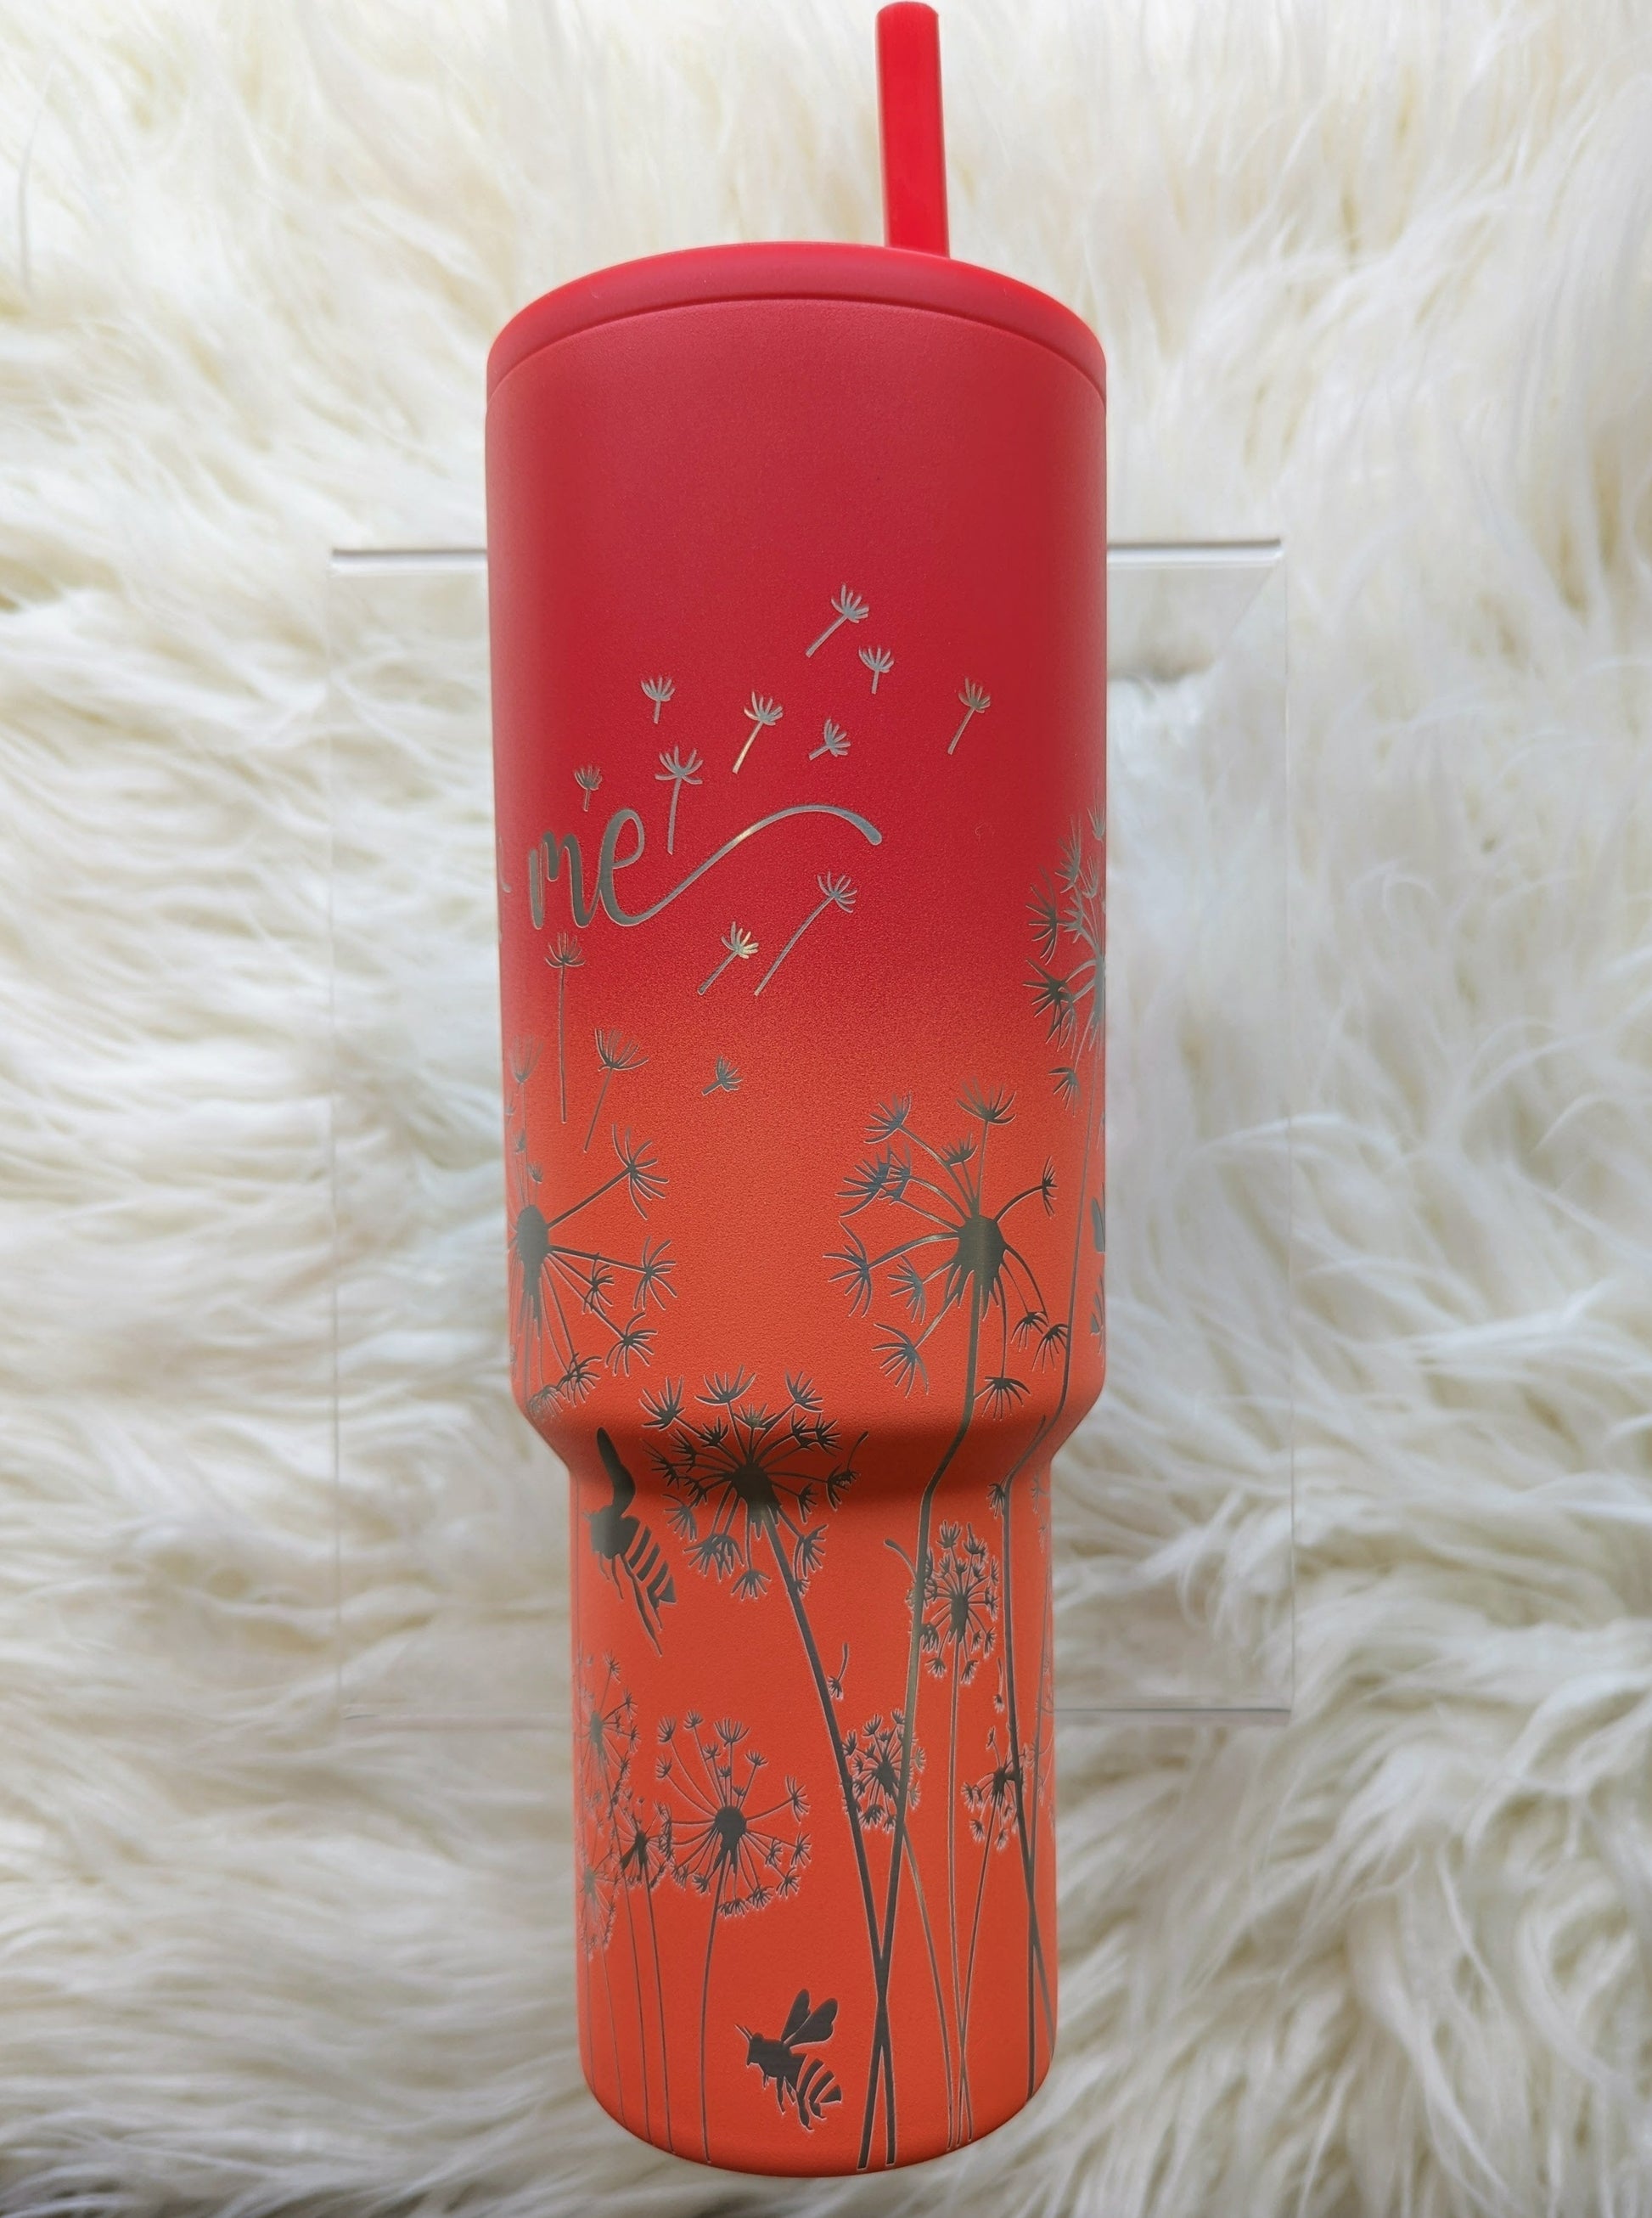 Dandelion "Blow Me" pattern engraved on peach and pink 40 oz insulated tumbler with handle by Simple Modern